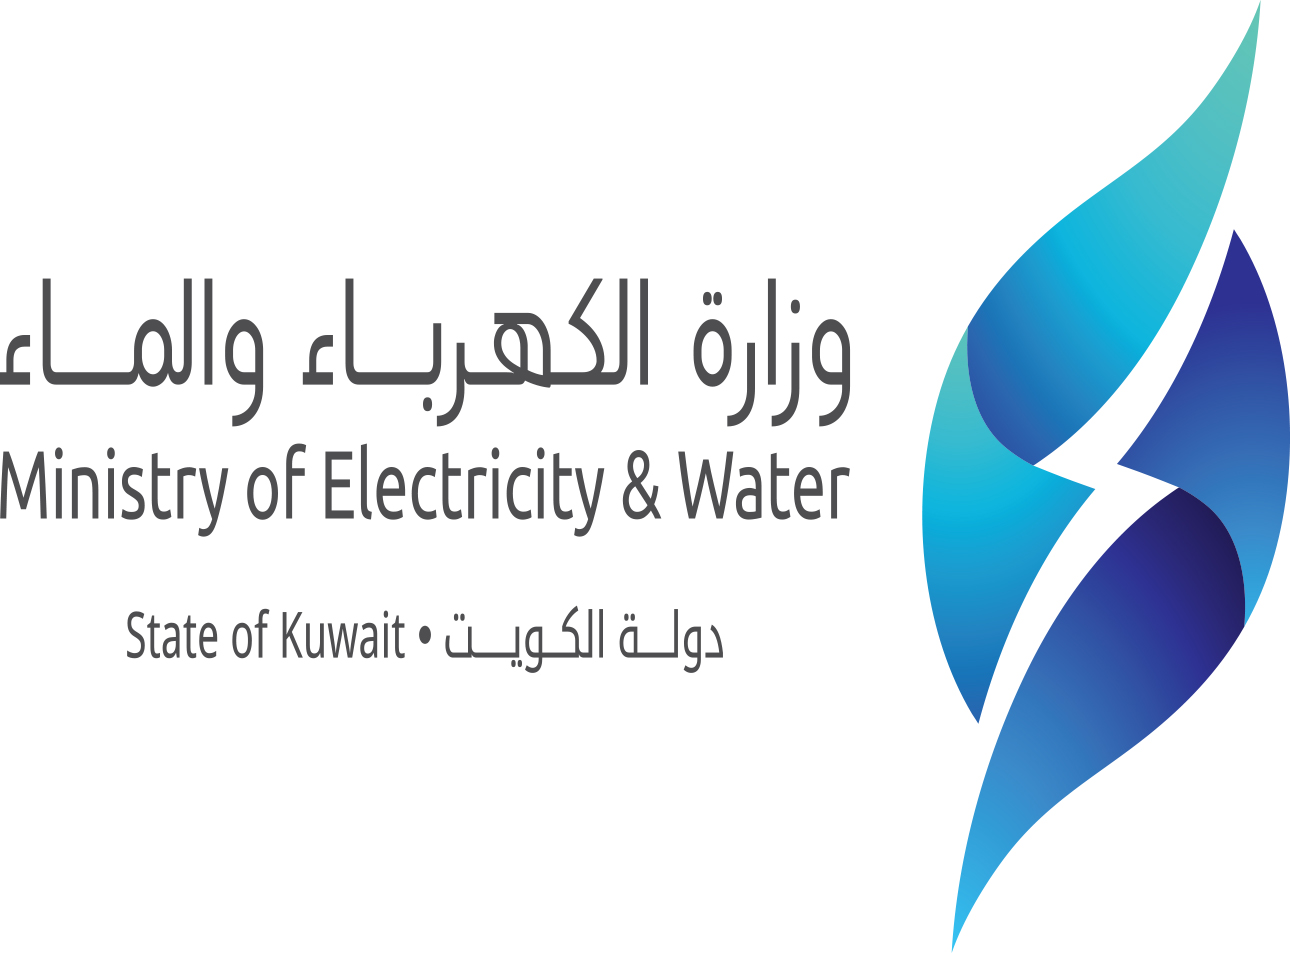 Kuwait Water, Electricity Ministry to produce billion imp gal. of water by 2035                                                                                                                                                                           